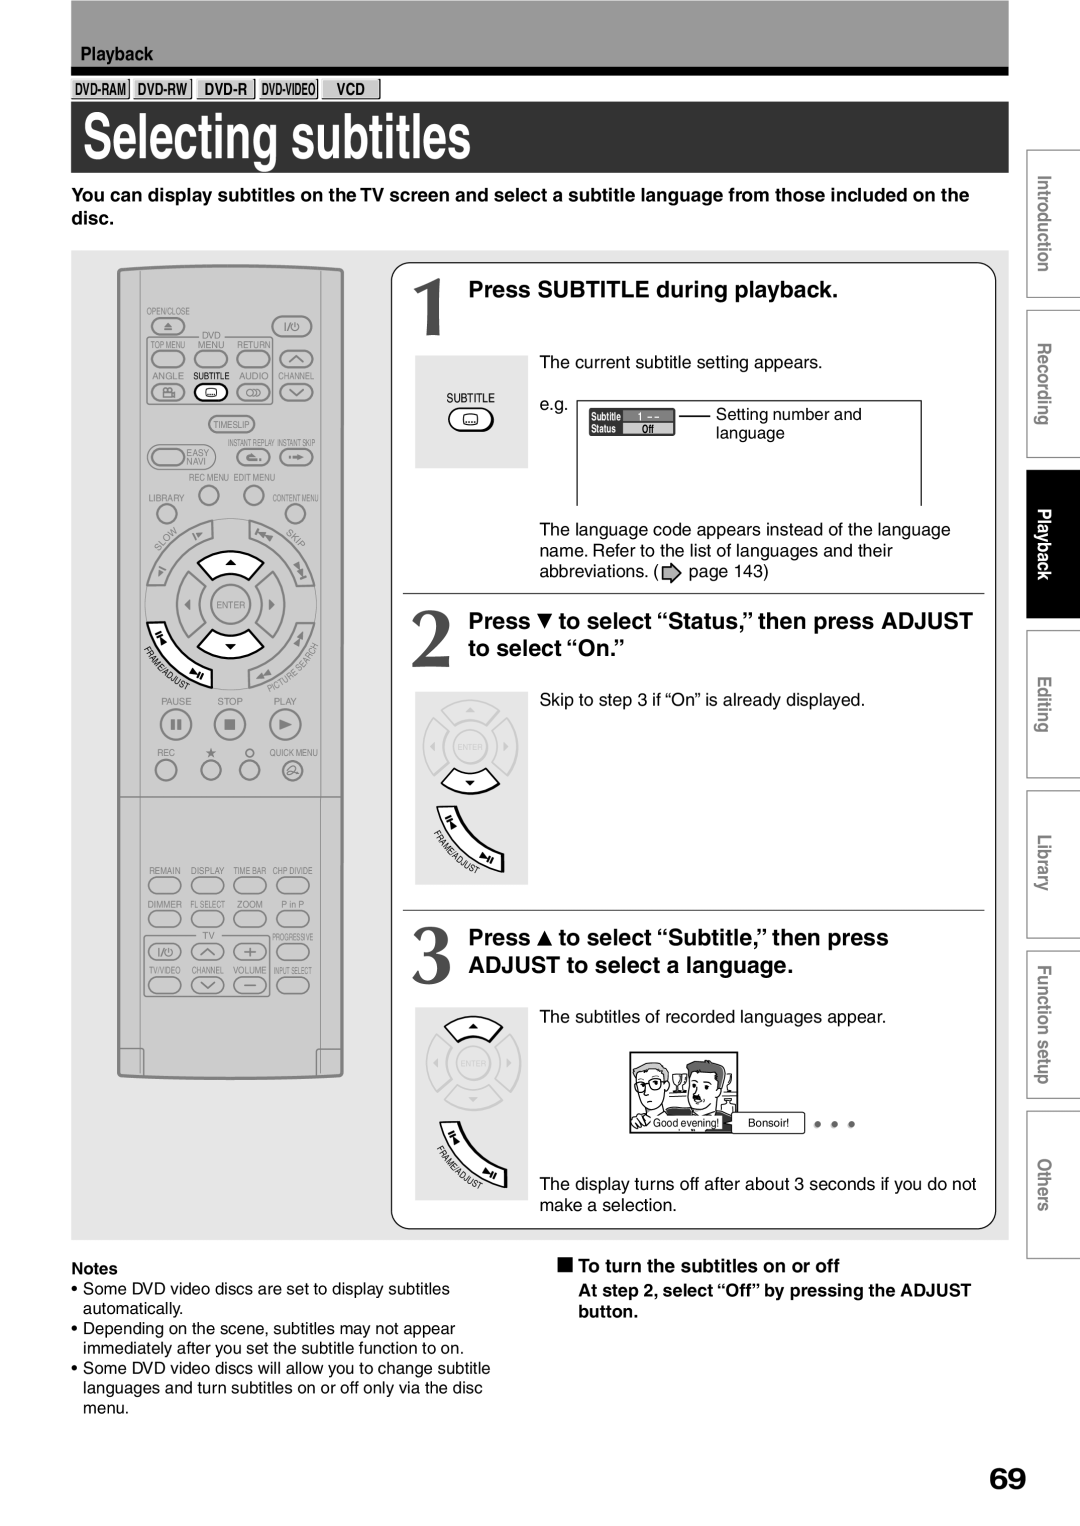 Toshiba D-R2SU Selecting subtitles, Press SUBTITLE during playback, disc, To turn the subtitles on or off, Playback 